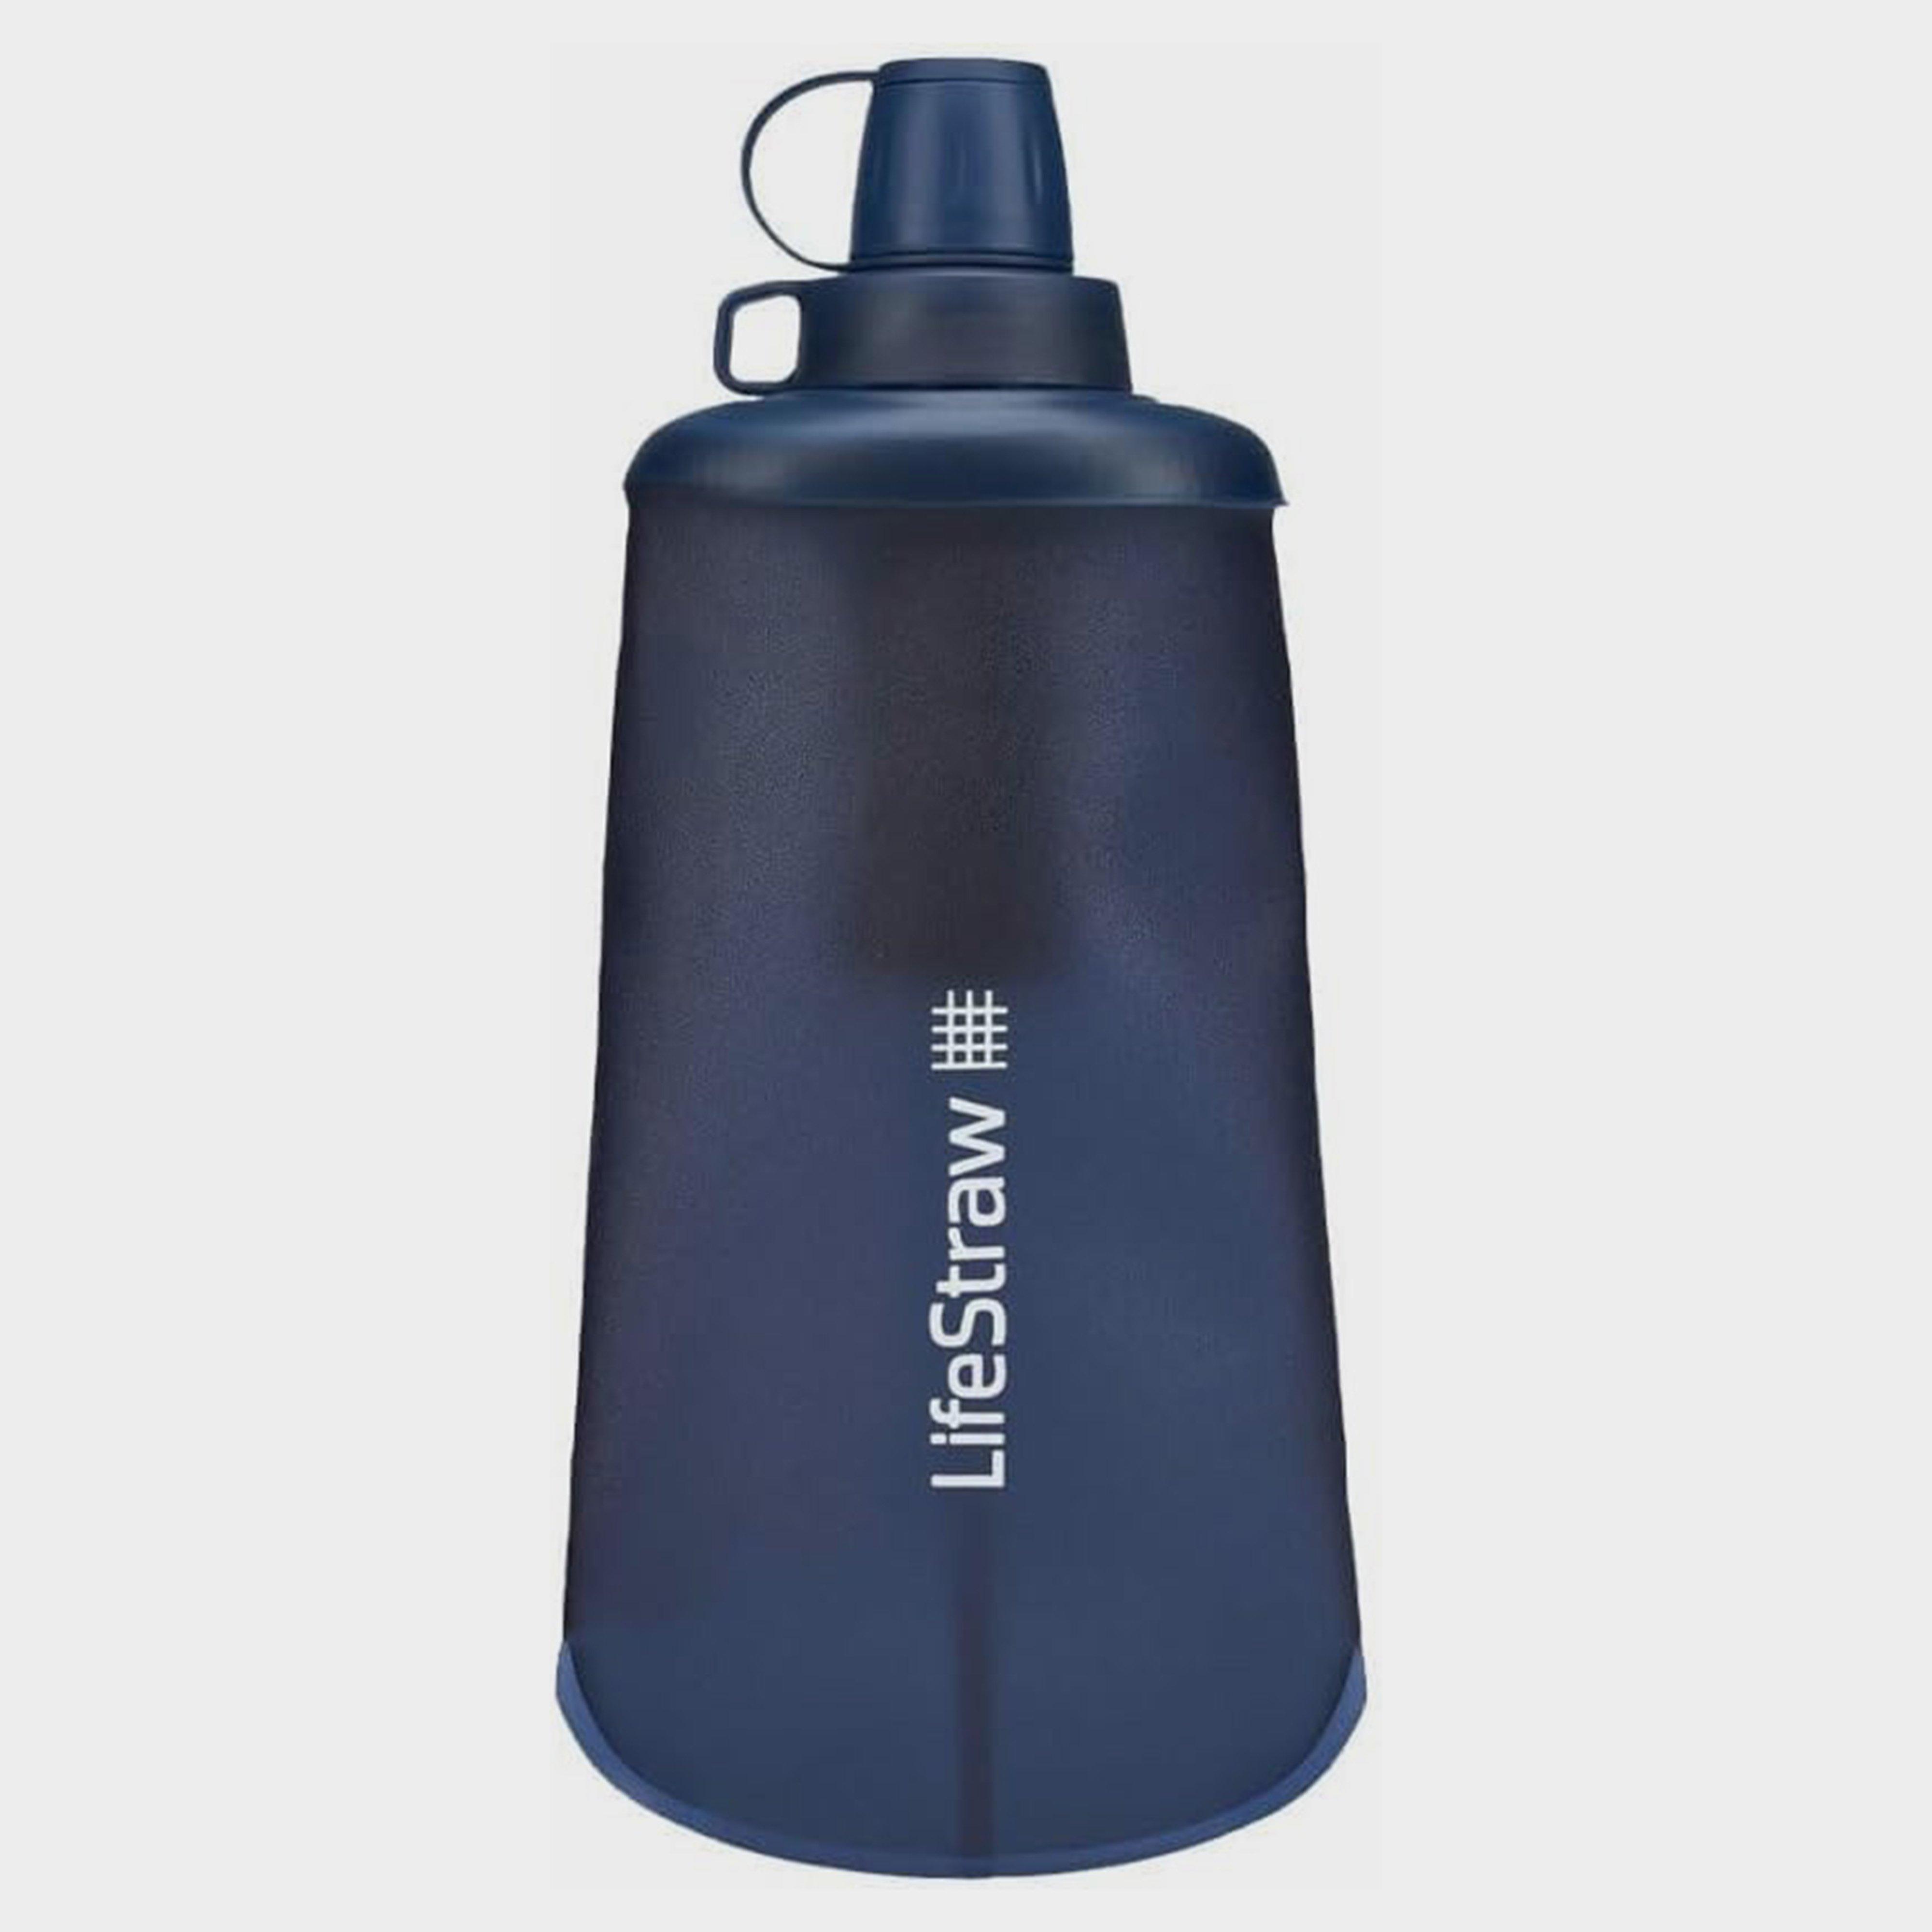 Lifestraw Lifestraw Peak Series Collapsible Squeeze Bottle With Filter - 650Ml - Db, DB